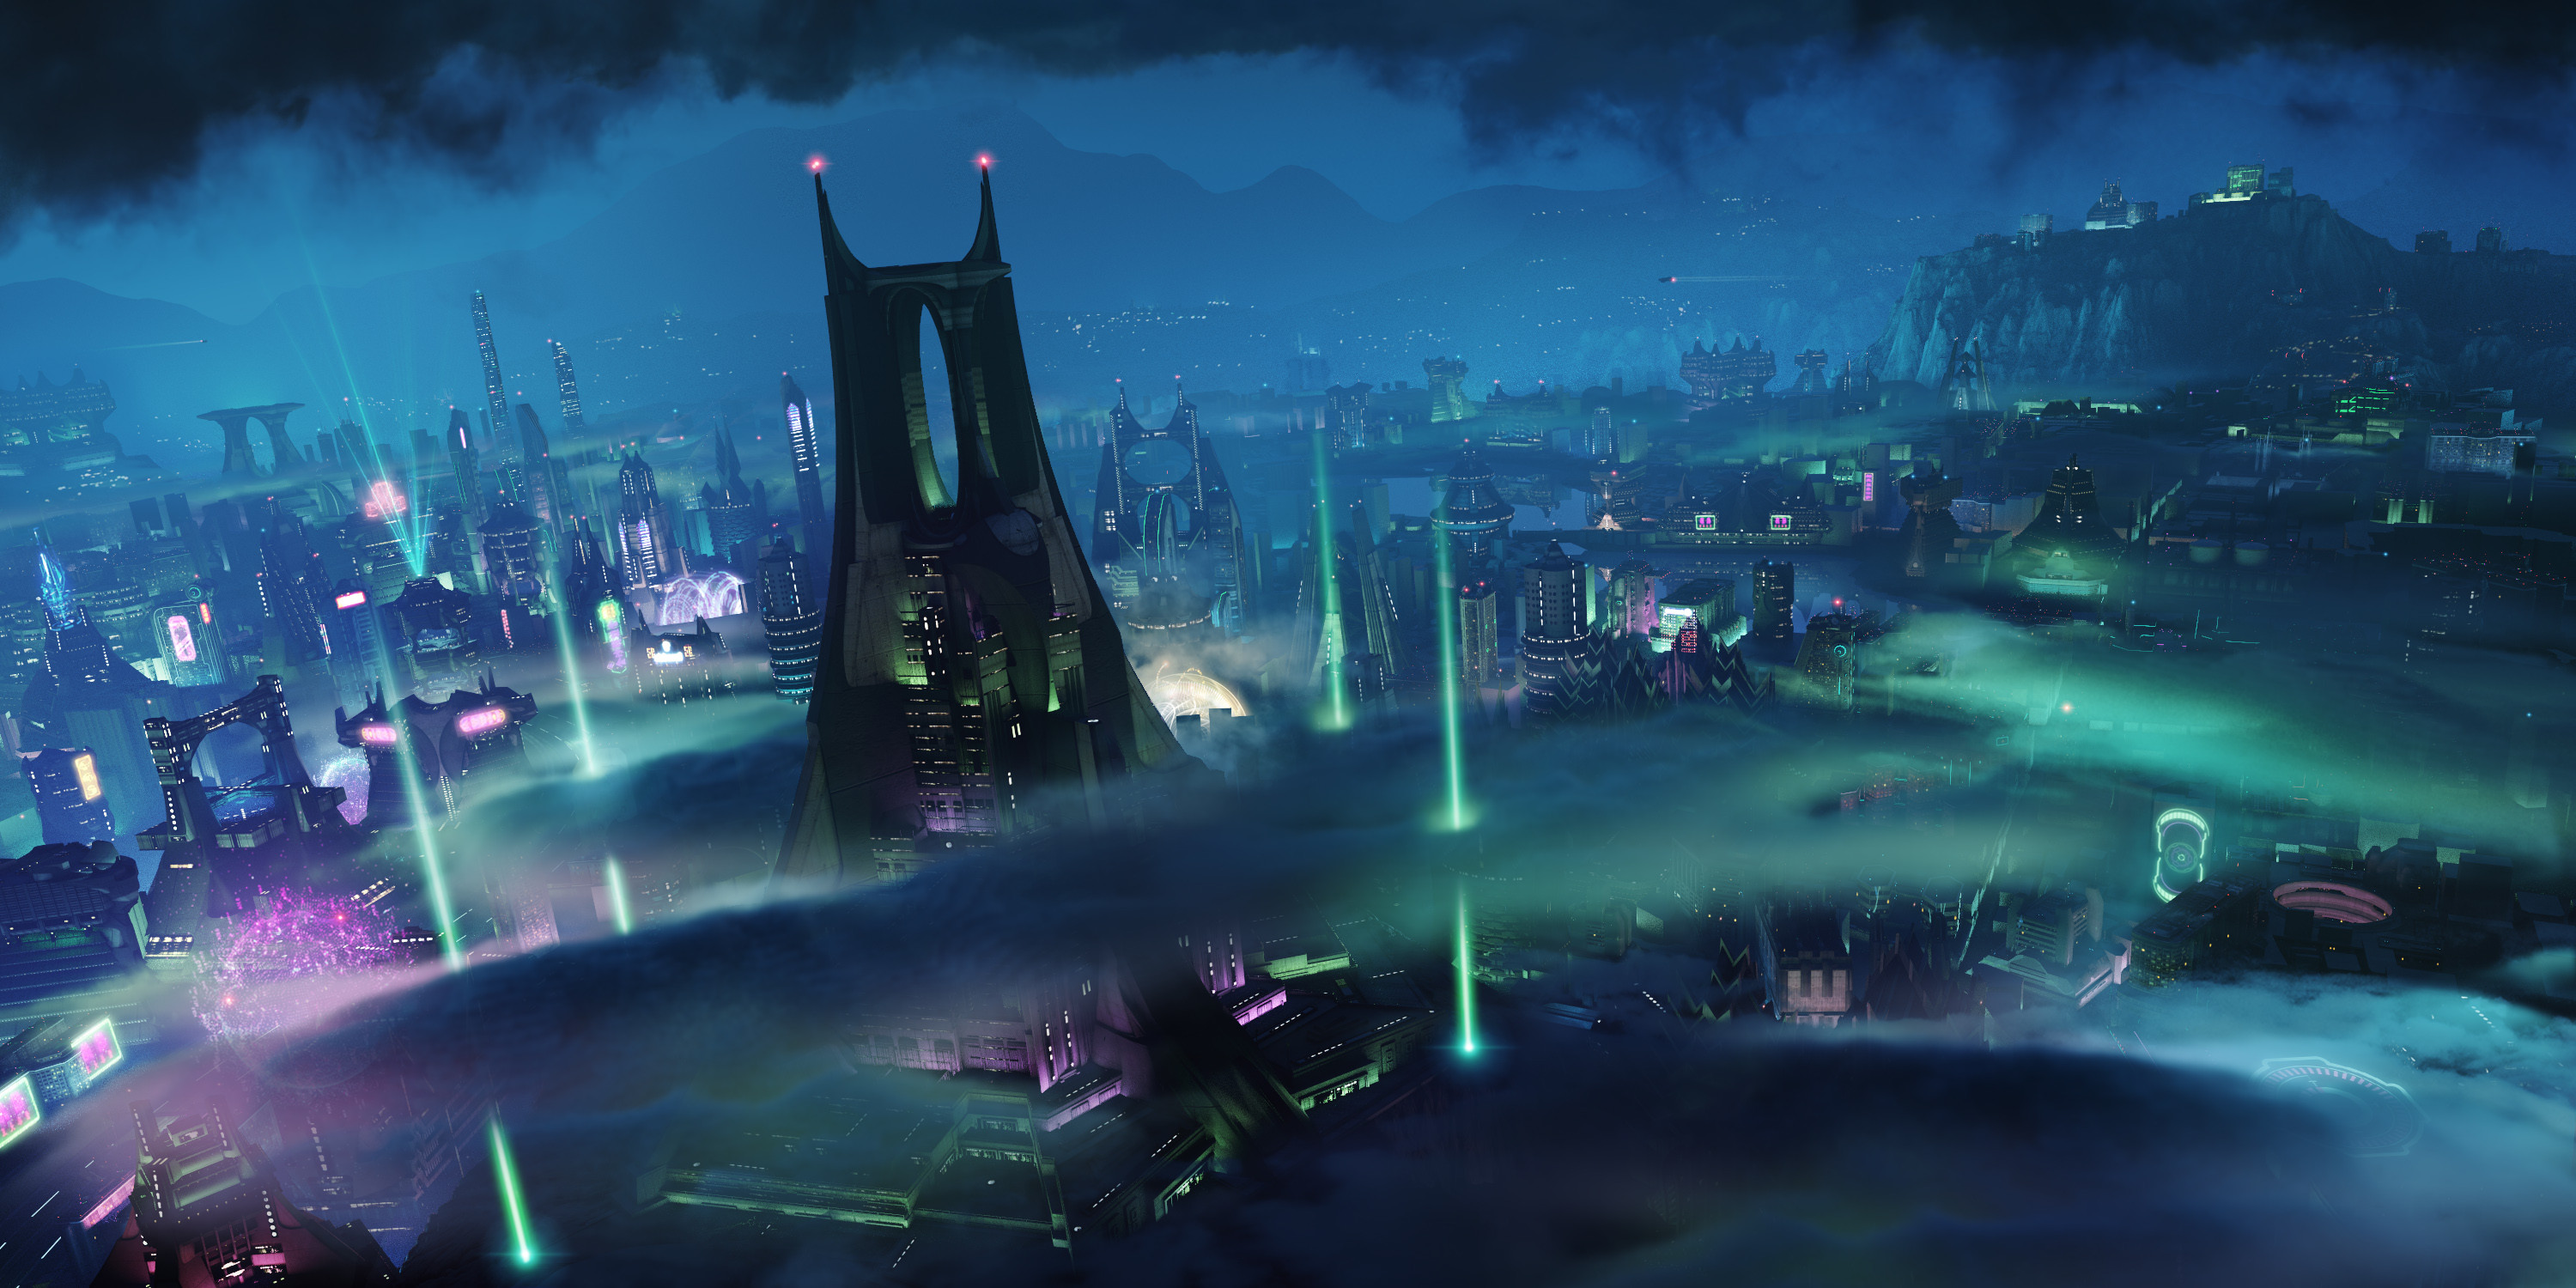 'The Orville' : 'New Horizons'
Krill City - Concept Art
A close up of the Great Hall.